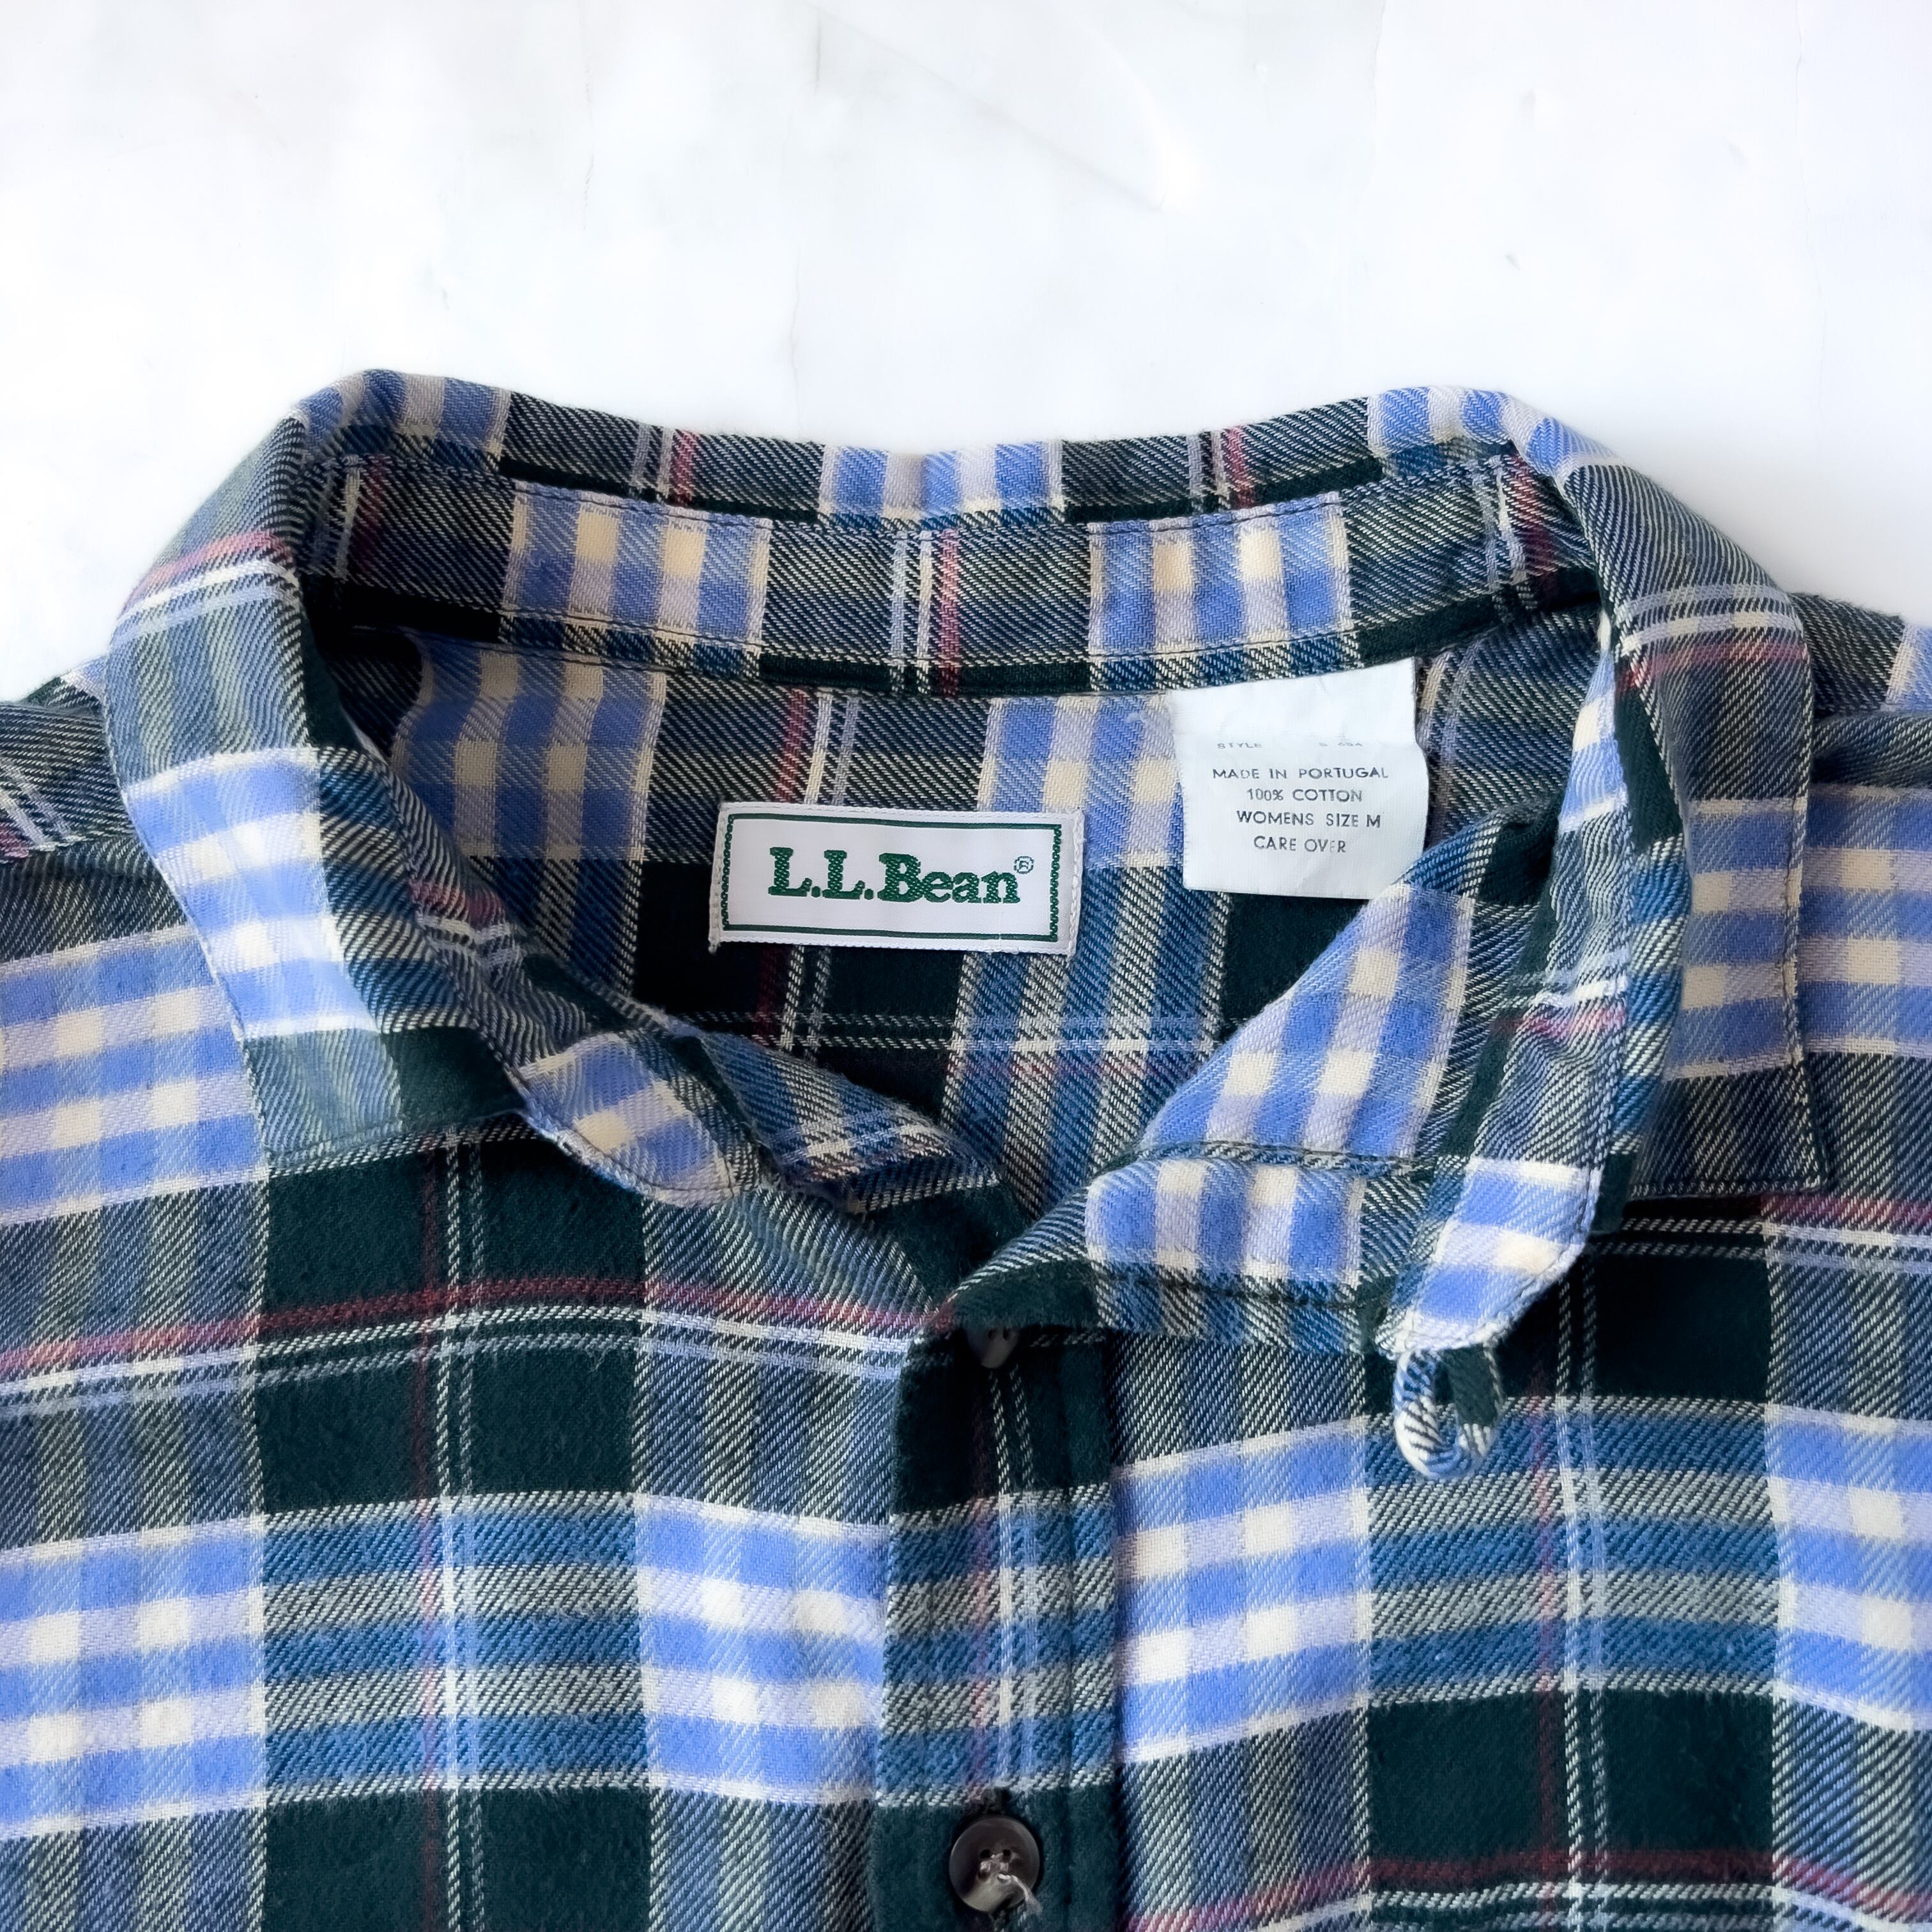 80s “L.L. Bean” box silhouette check pattern shirt made in